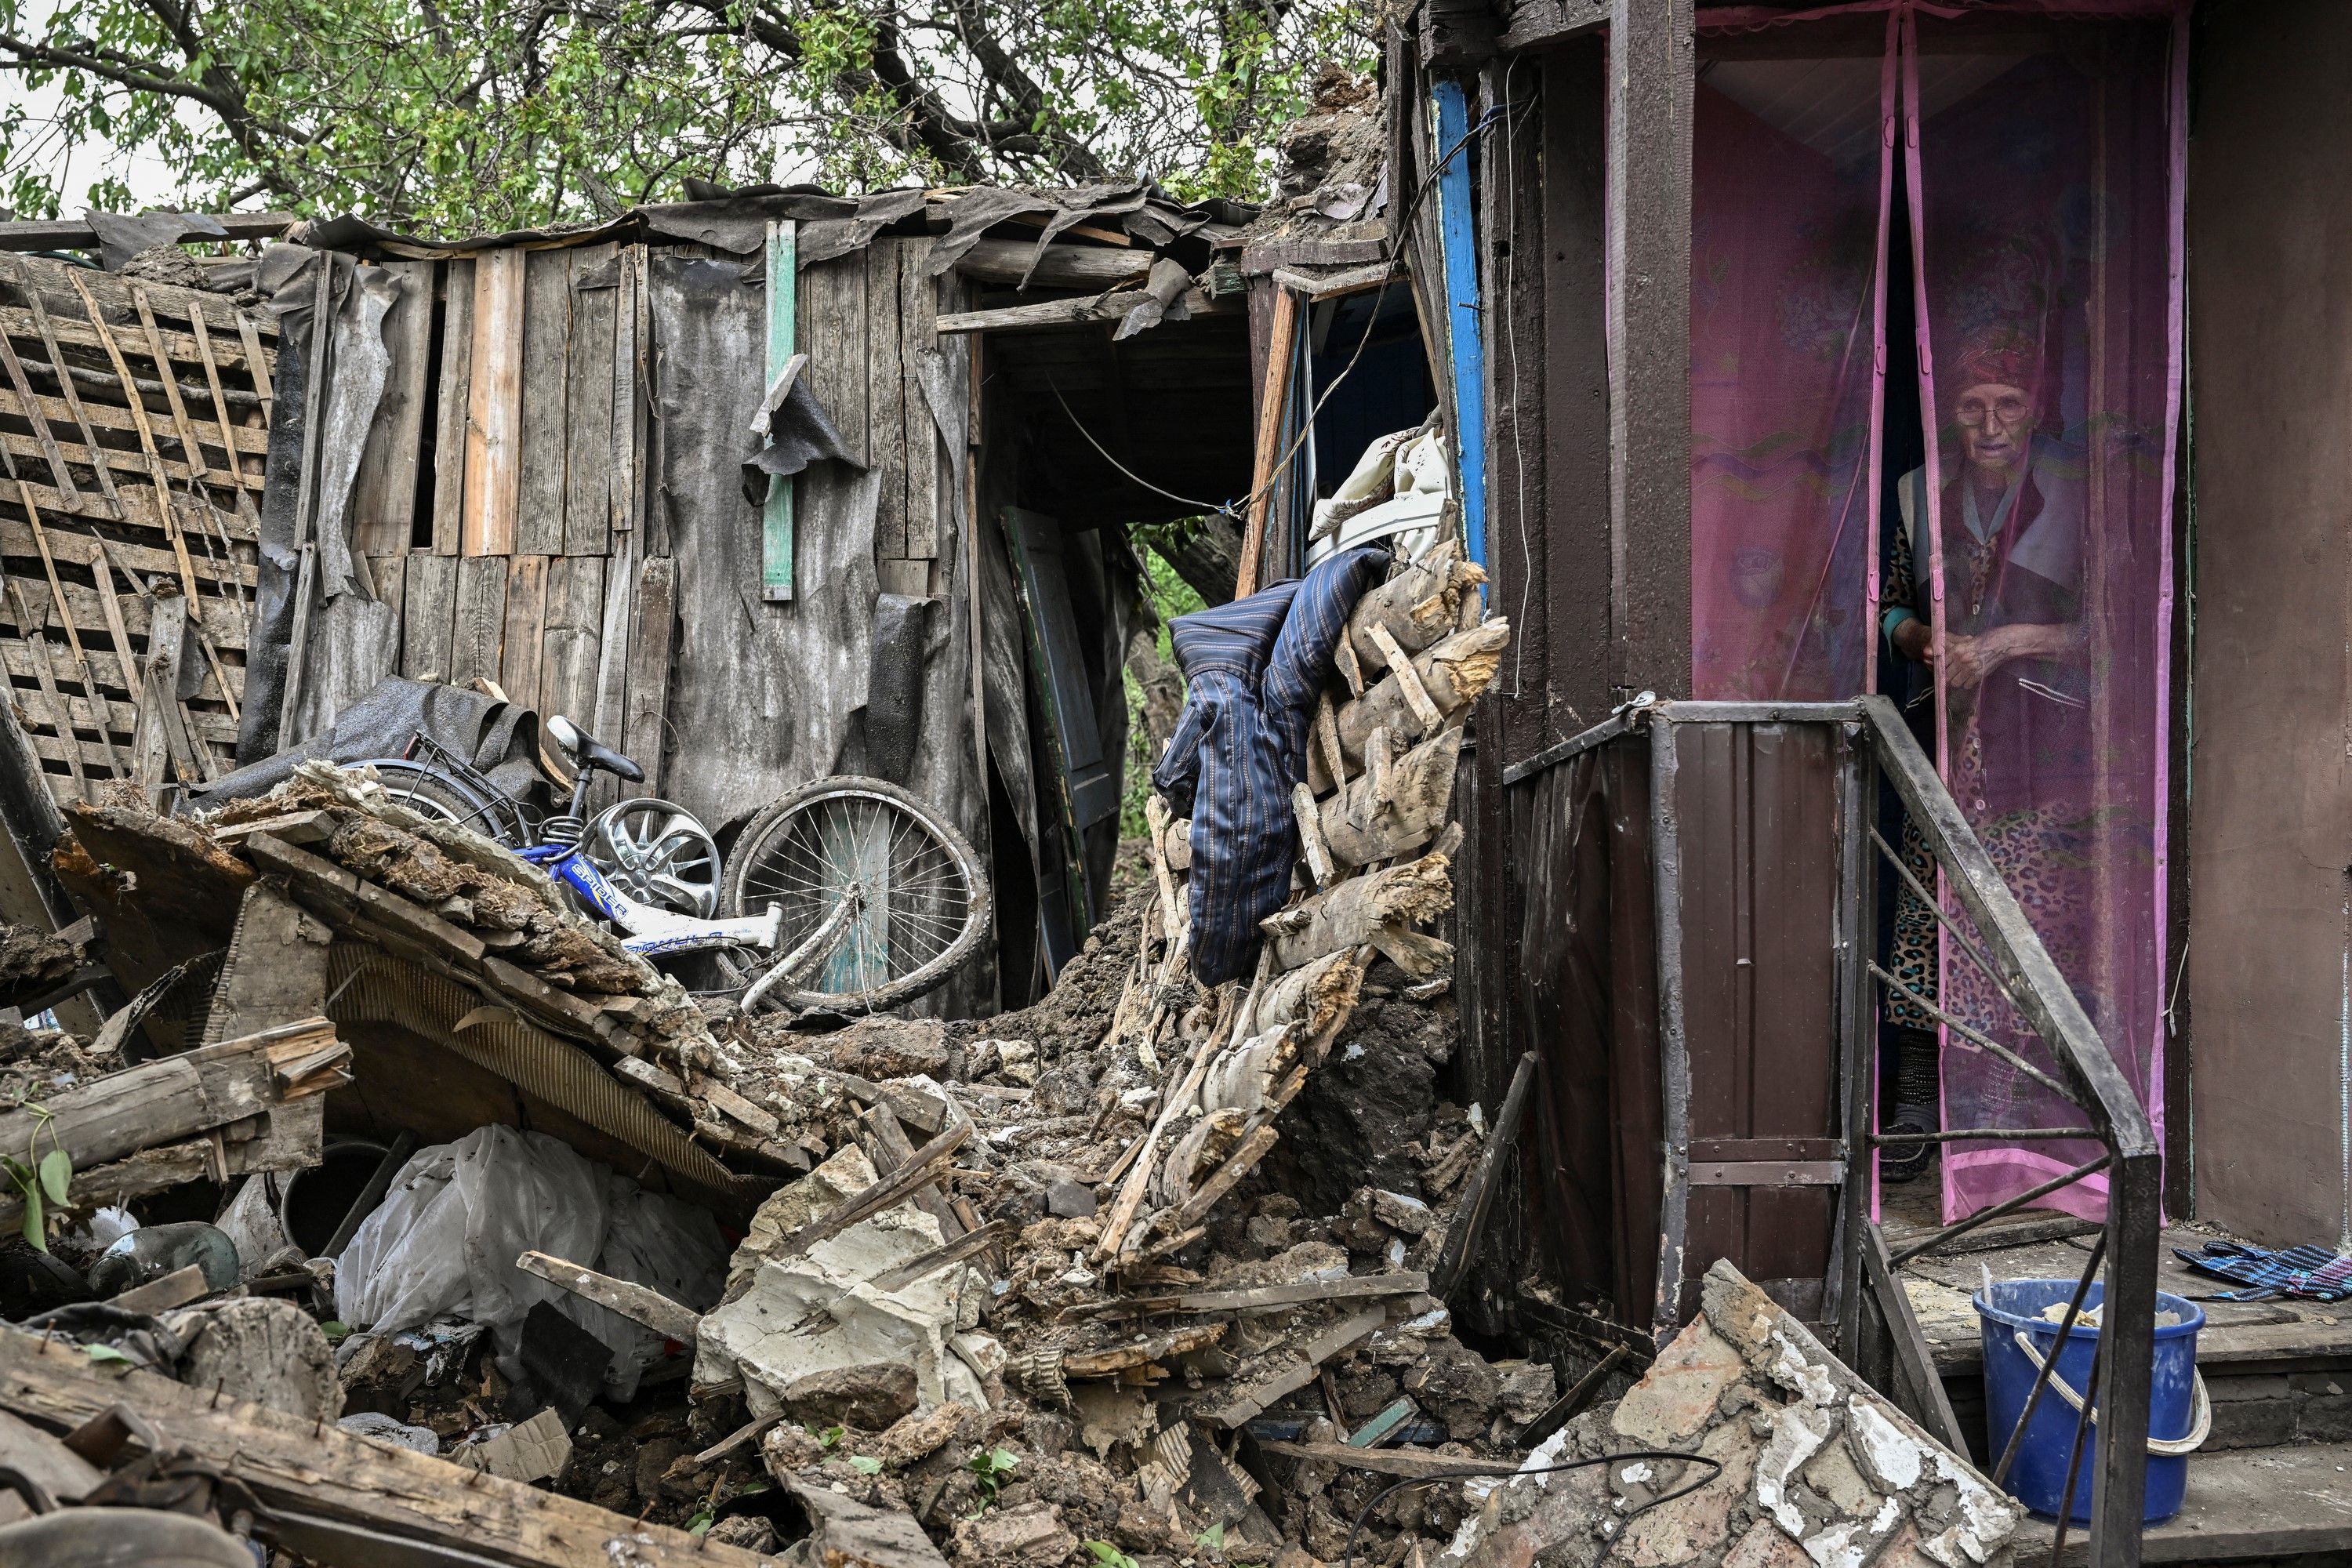 An eldery woman stands inside her heavily damaged house after it was hit by a missile in the city of Bakhmut at the eastern Ukranian region of Donbas on May 22